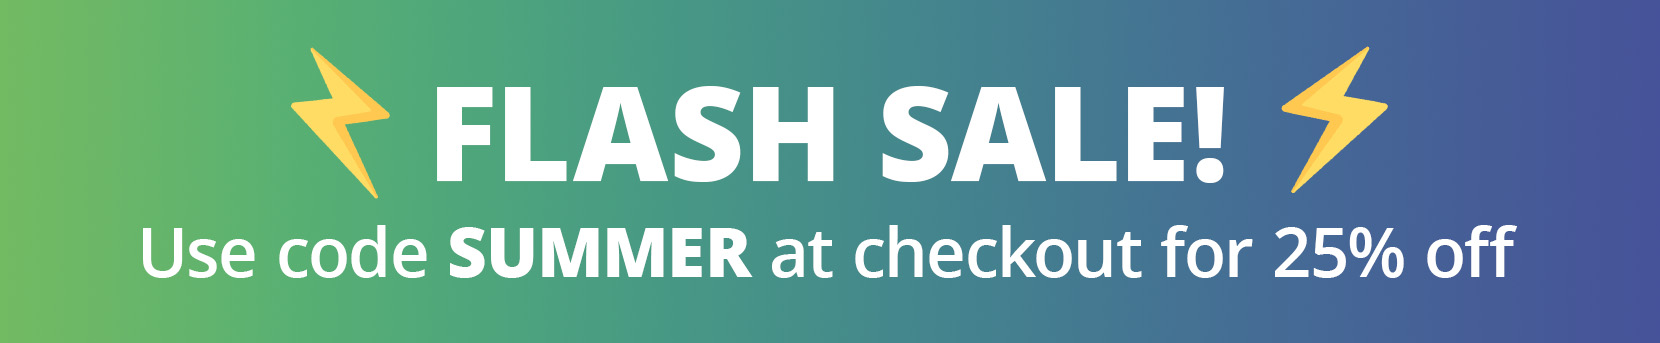 FLASH SALE - Use code SUMMER at checkout for 25% off